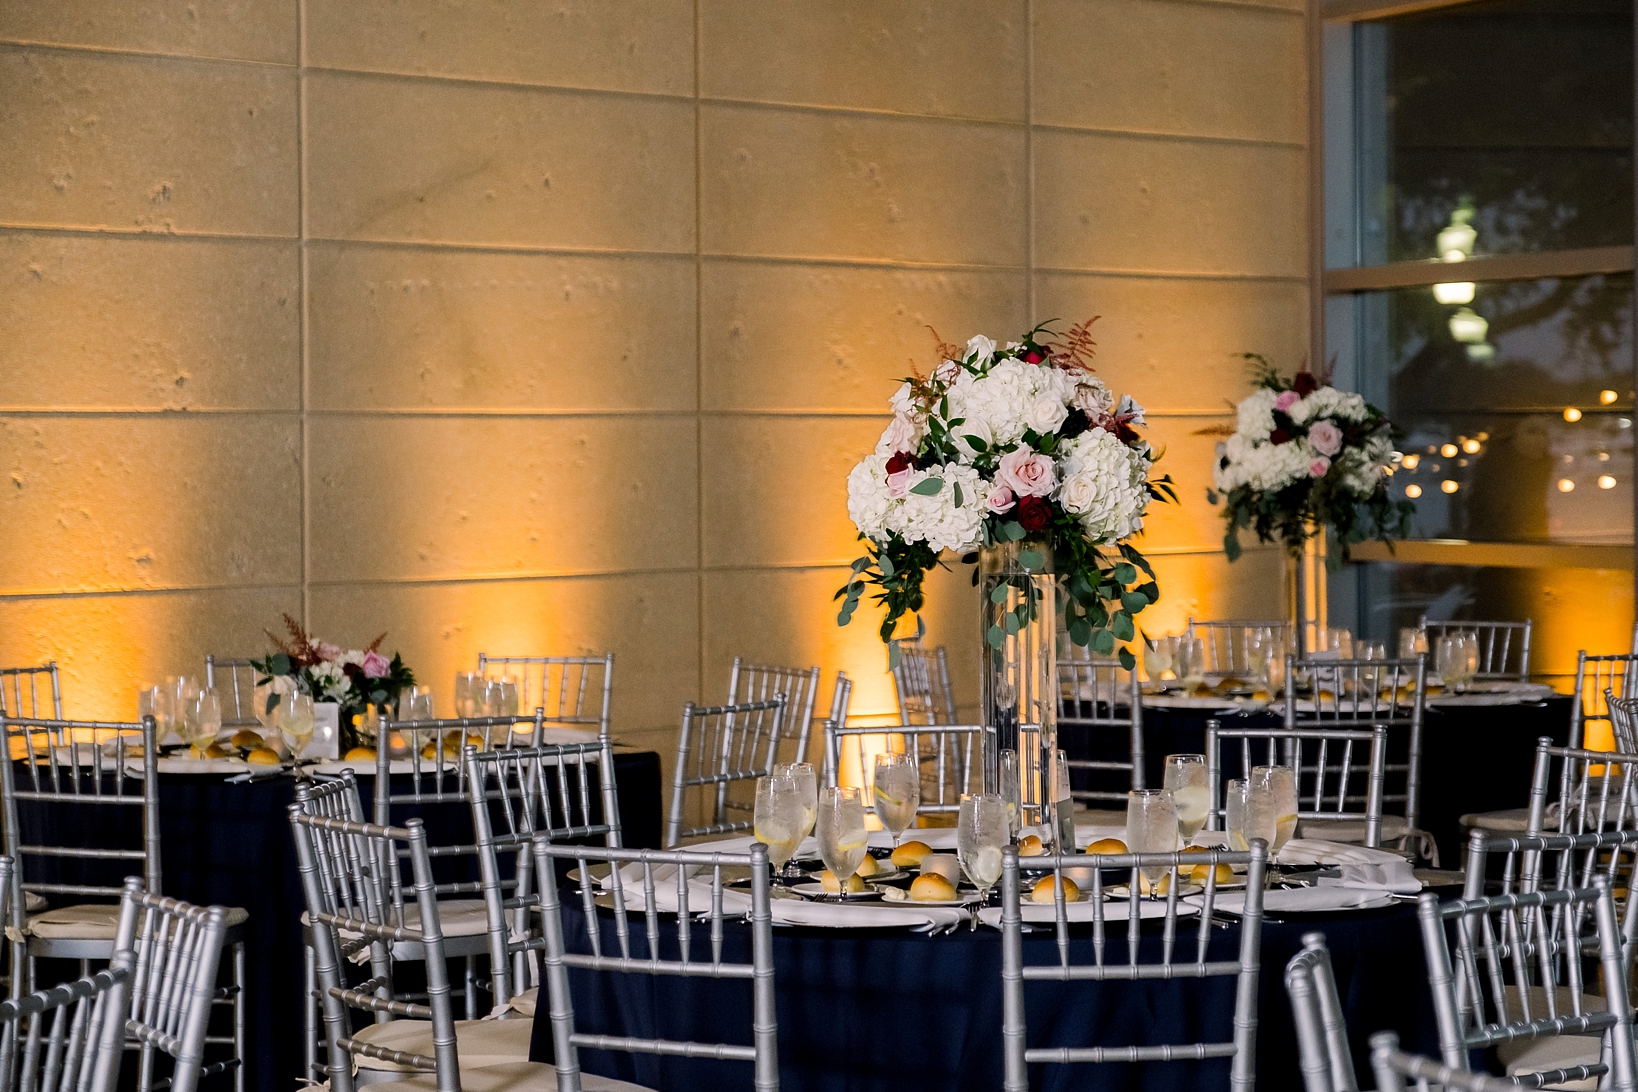 The wedding reception with uplighting and tall floral decor by Sarah & Ben Photography